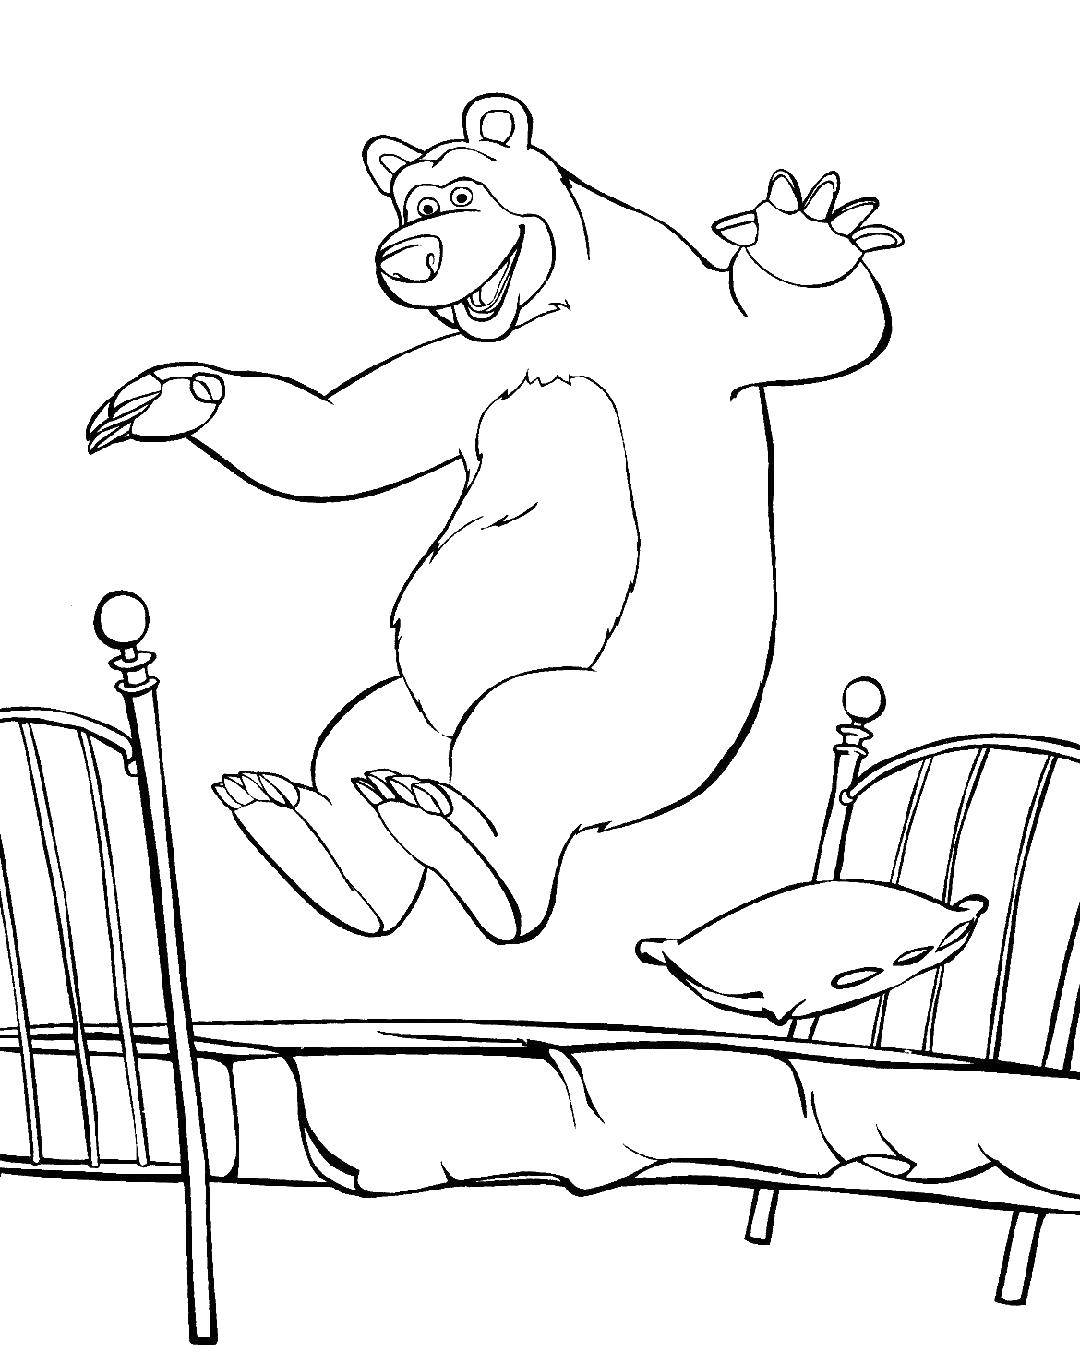 Coloring Bear jumping on the bed. Category The bed. Tags:  bed, bear, fairy tale.